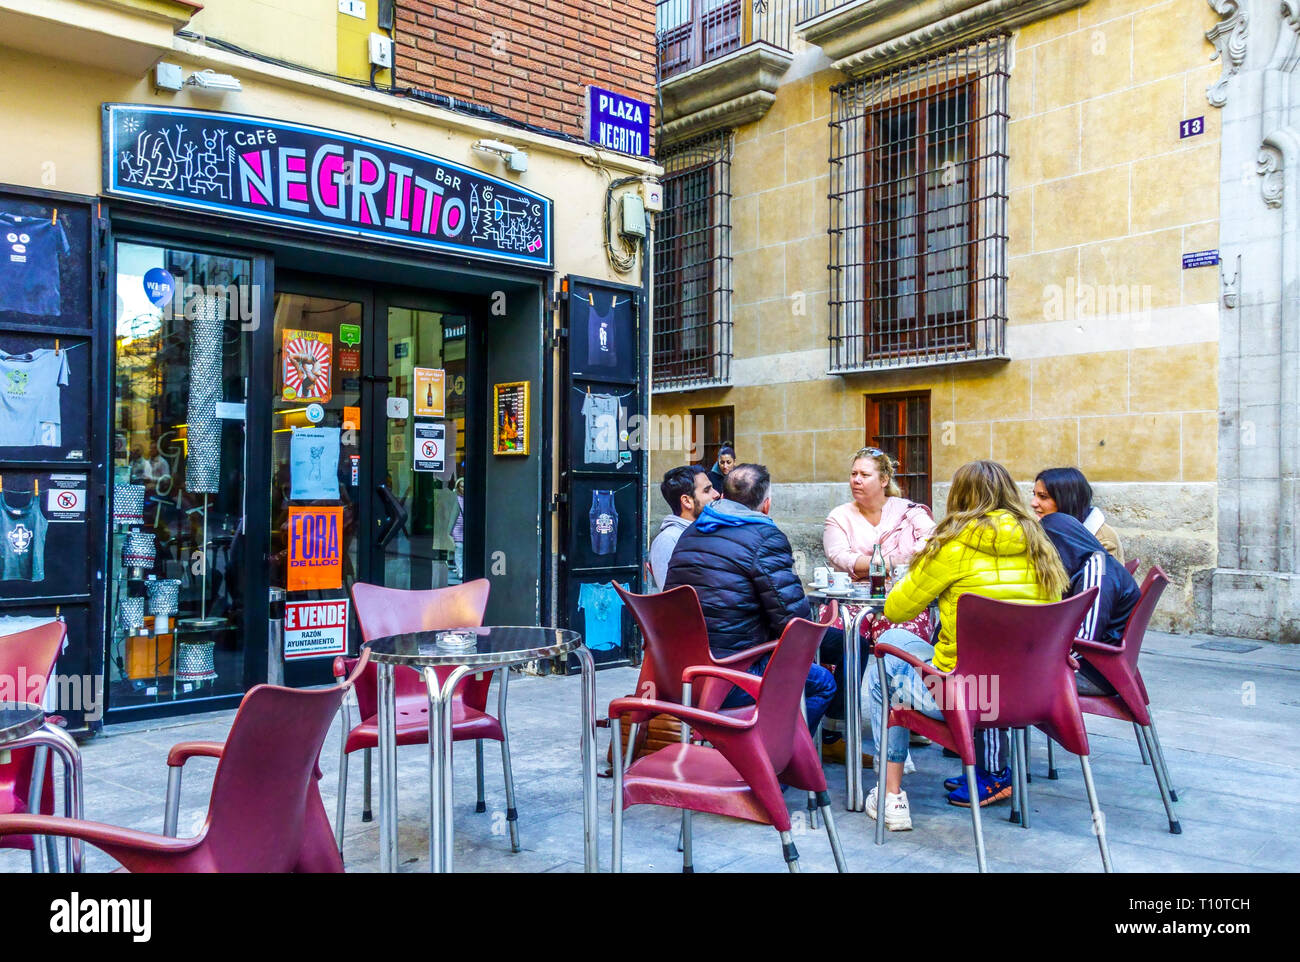 Valencia Old Town Spain Bar Cafe Negrito, People sitting outside bar  tourists on the sidewalk, street Valencia Spain Stock Photo